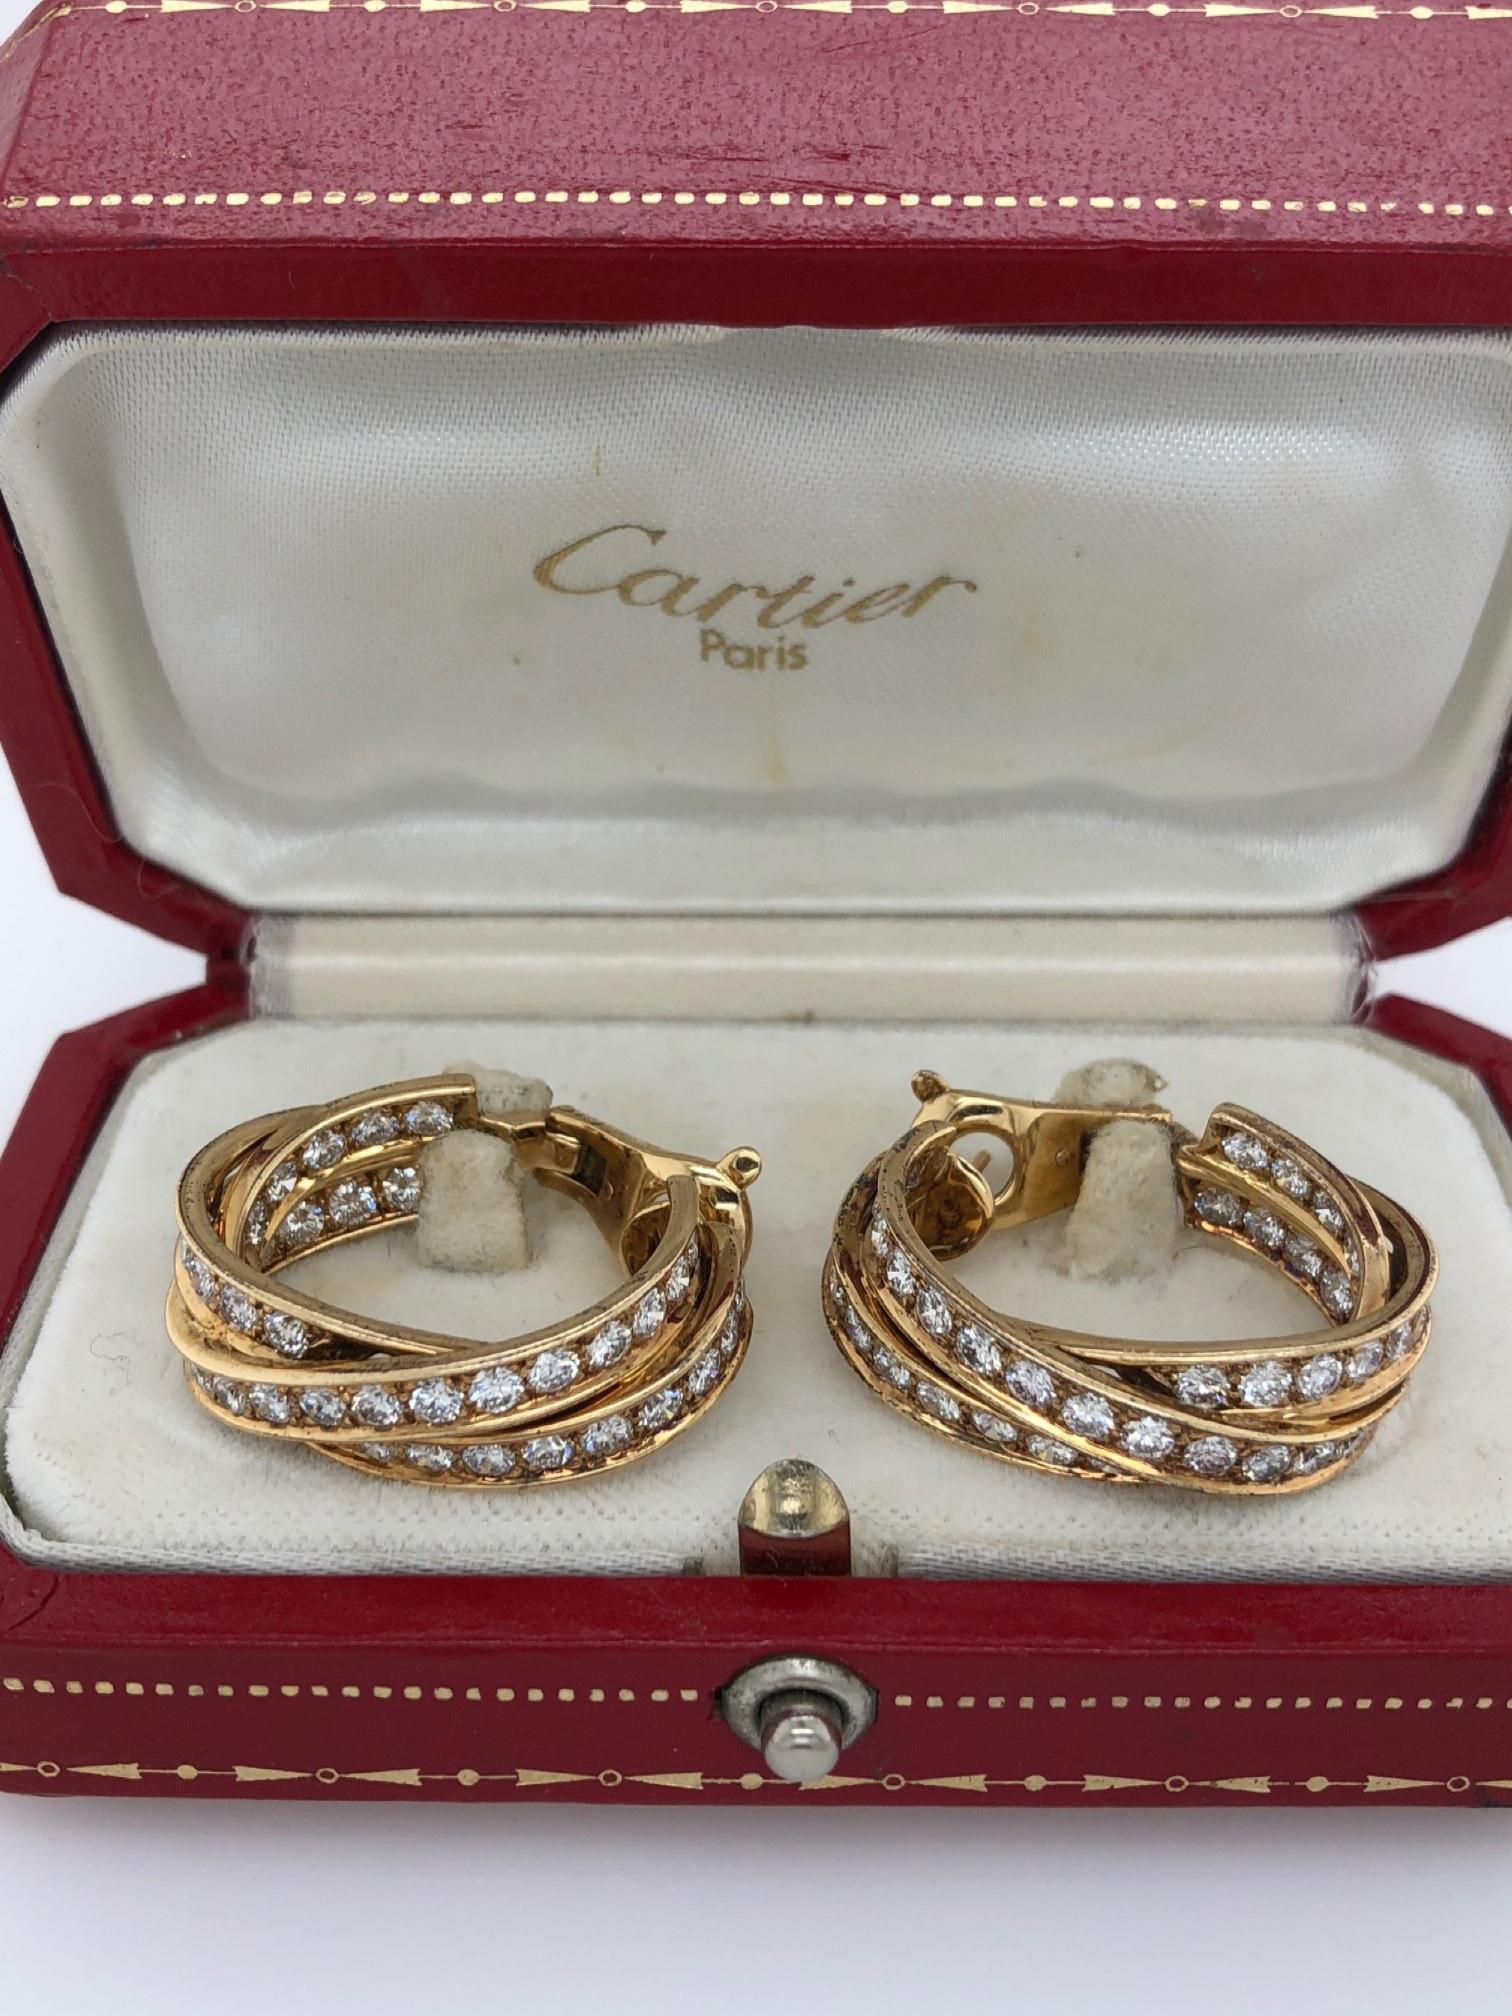 A pair of French1 8 karat gold earrings with diamond by Cartier. The three interlocking trinity bands create a dynamic hoop earring that collectively have 82 diamonds with an approximate total weight of 5.76 carats. Replete with its original box. 